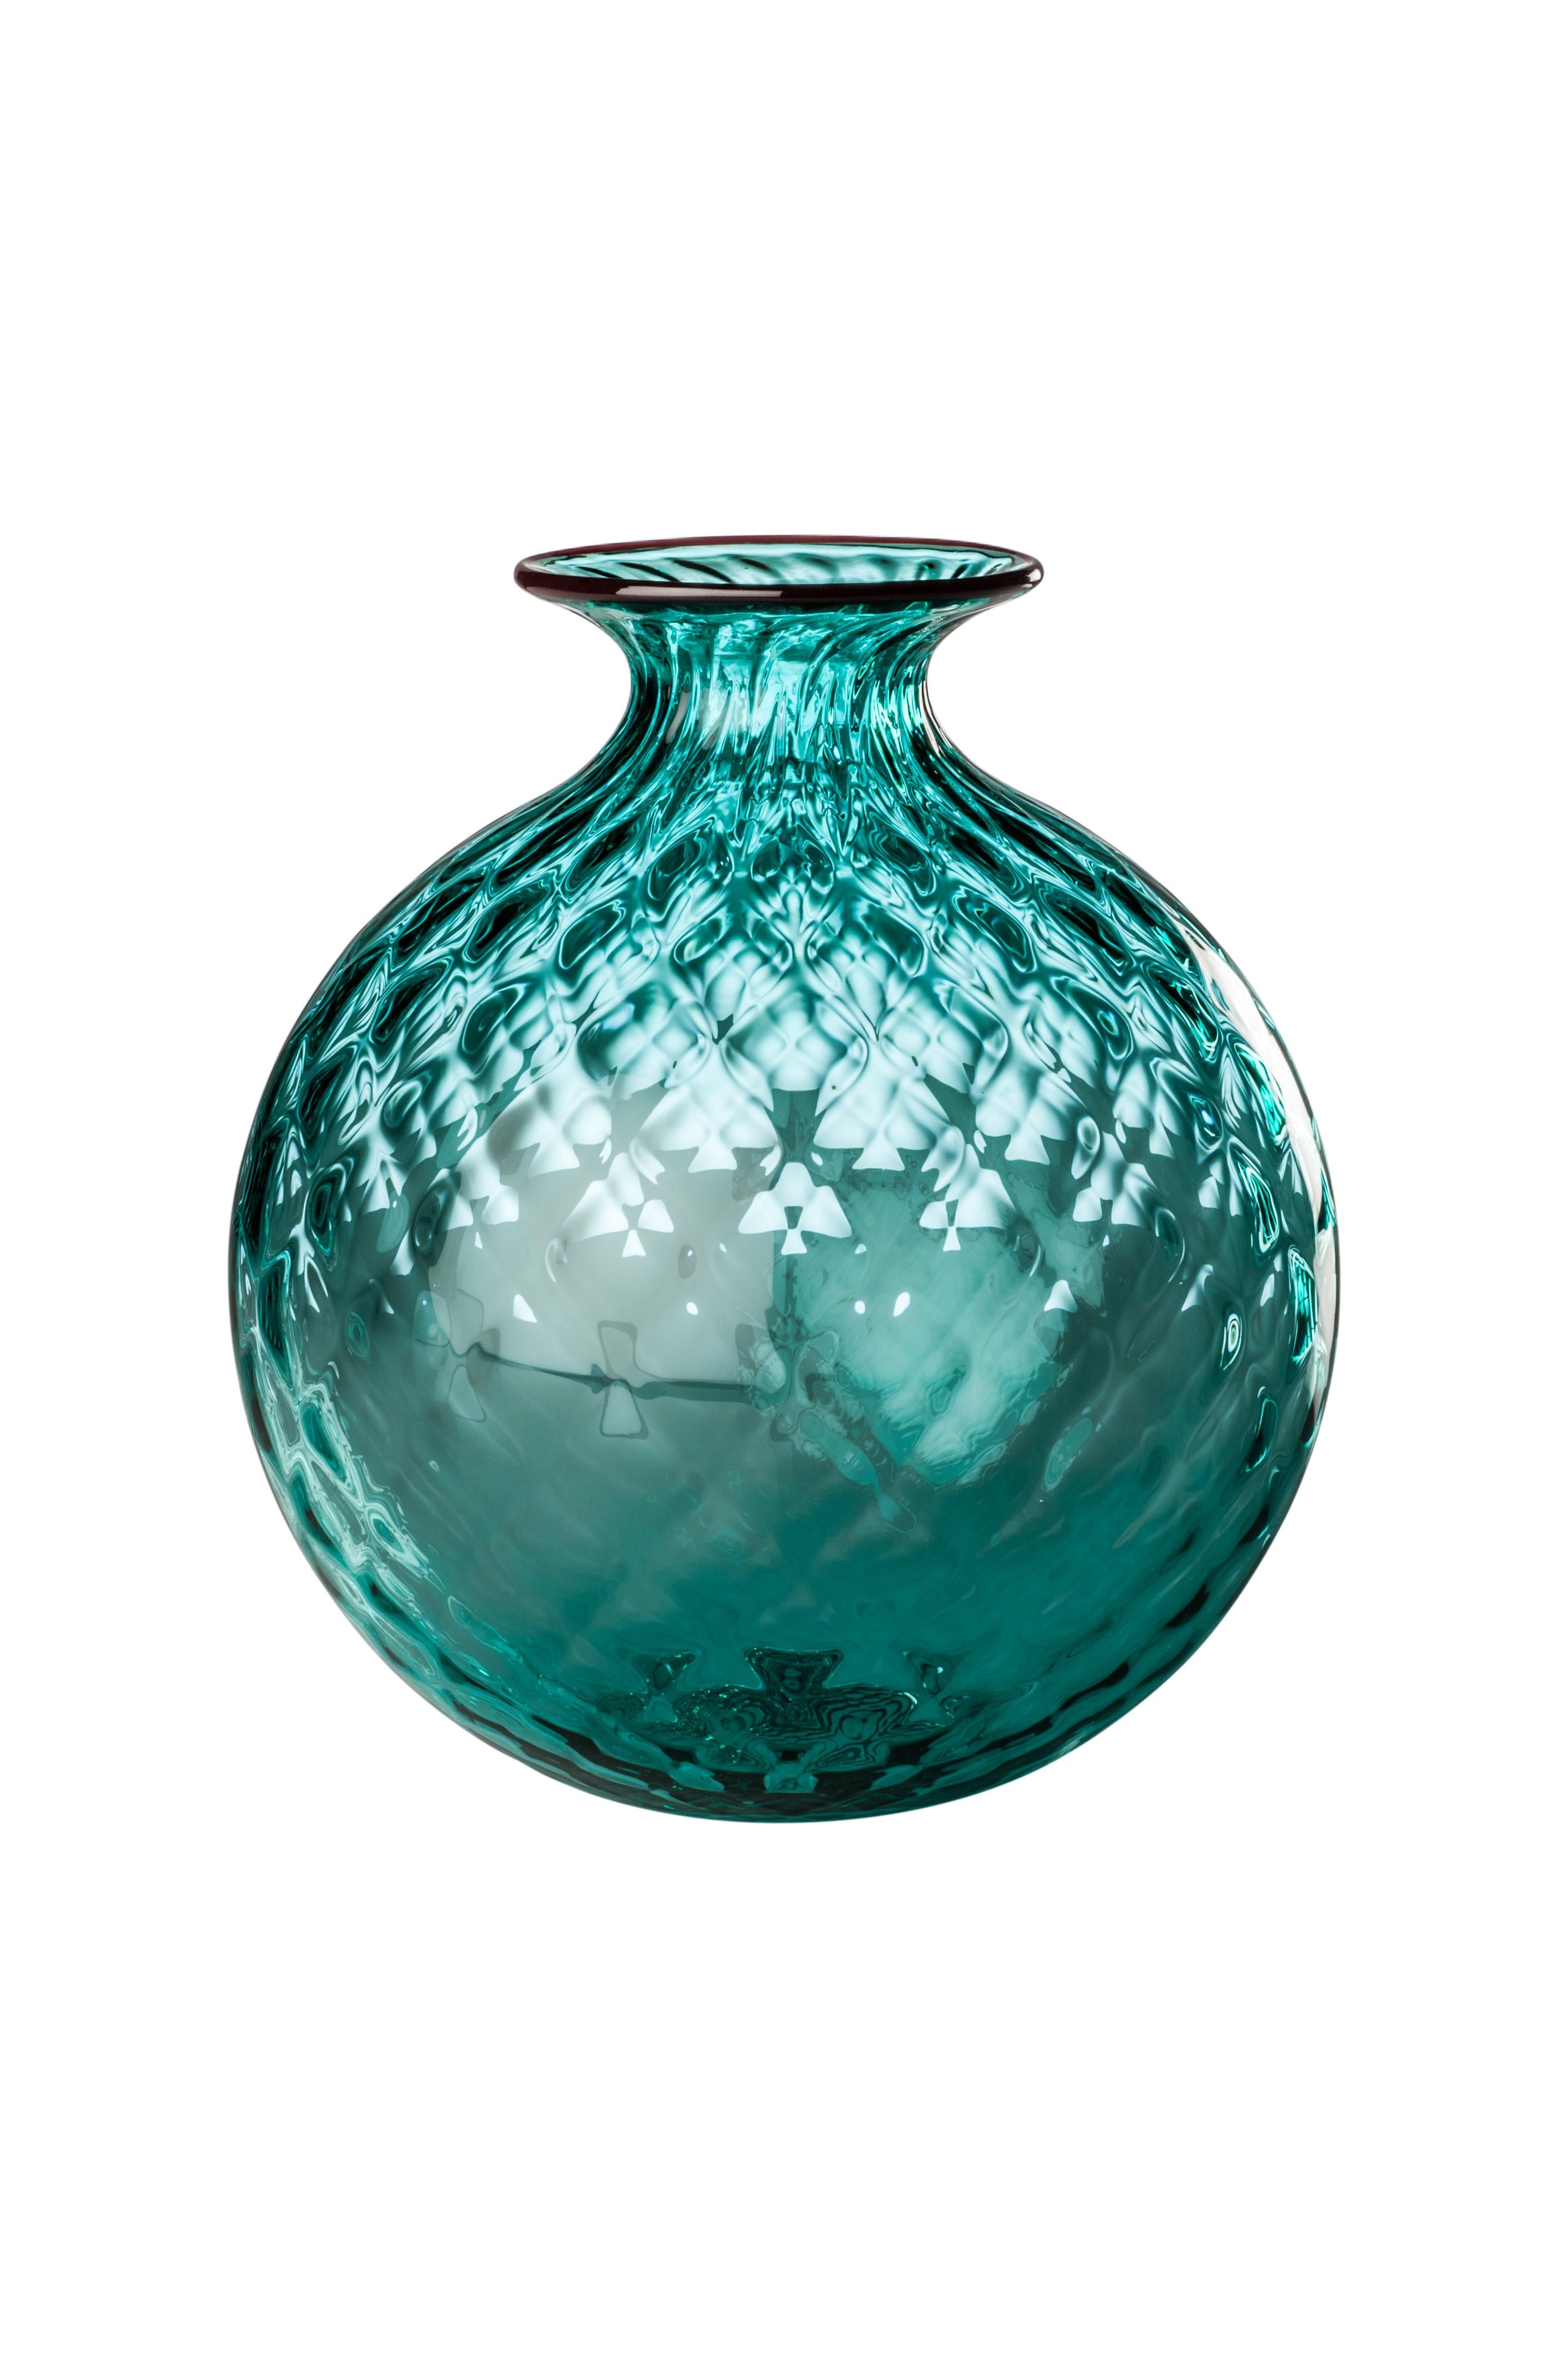 Venini glass vase with full body and textured surface with hexagonal shaped pattern in horizon blue designed in 1970. Perfect for indoor home decor as container or strong statement piece for any room. Also available in other colors on 1stdibs.